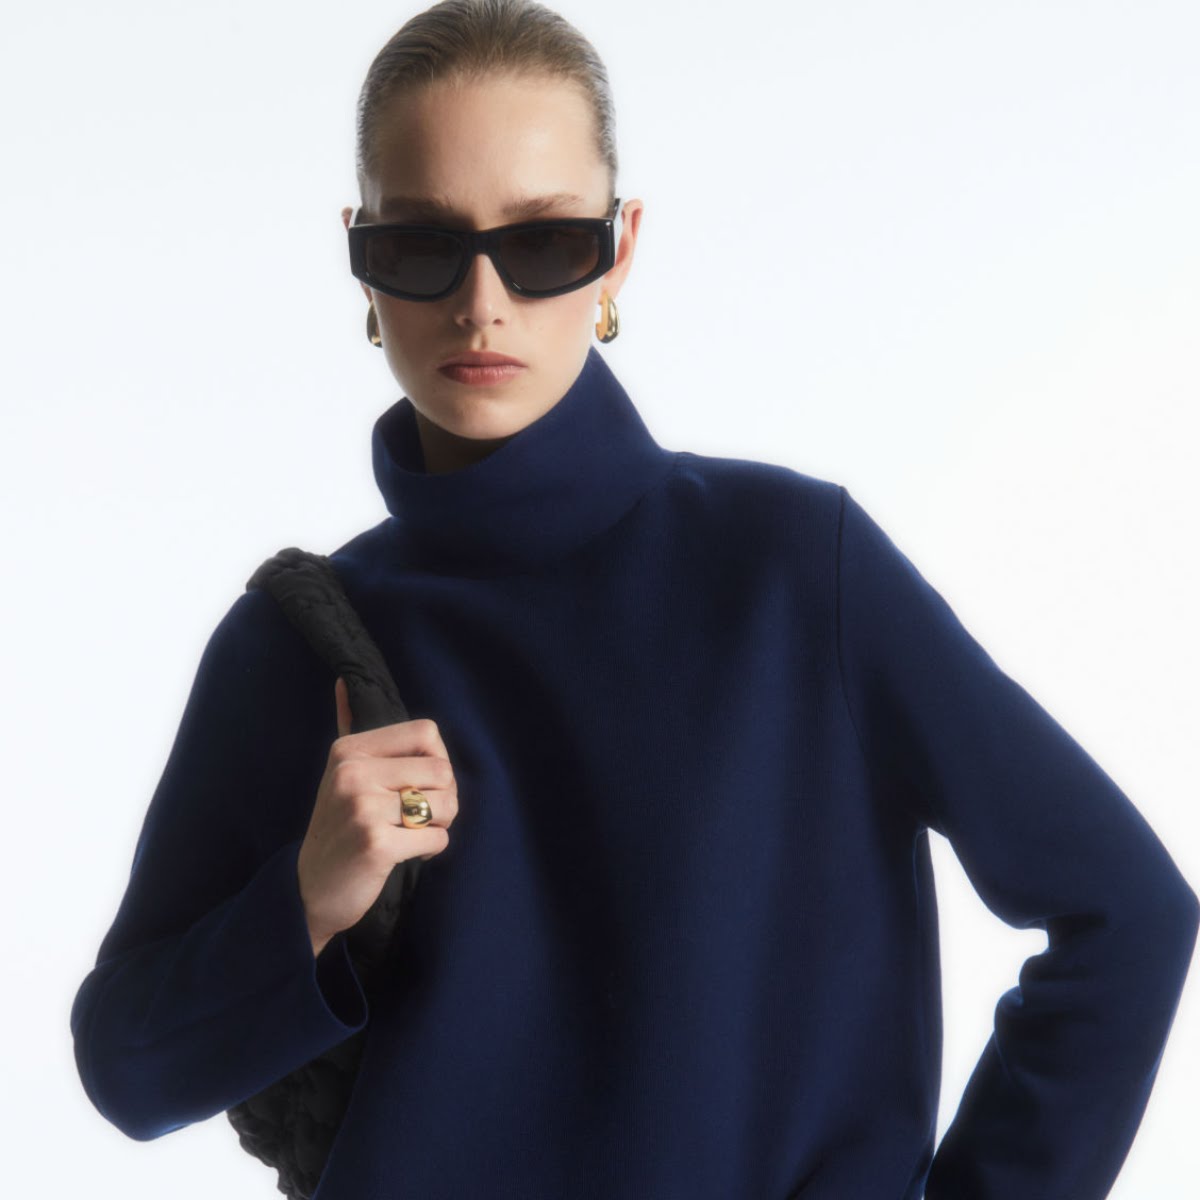 A-Line Funnel-Neck Top, €50